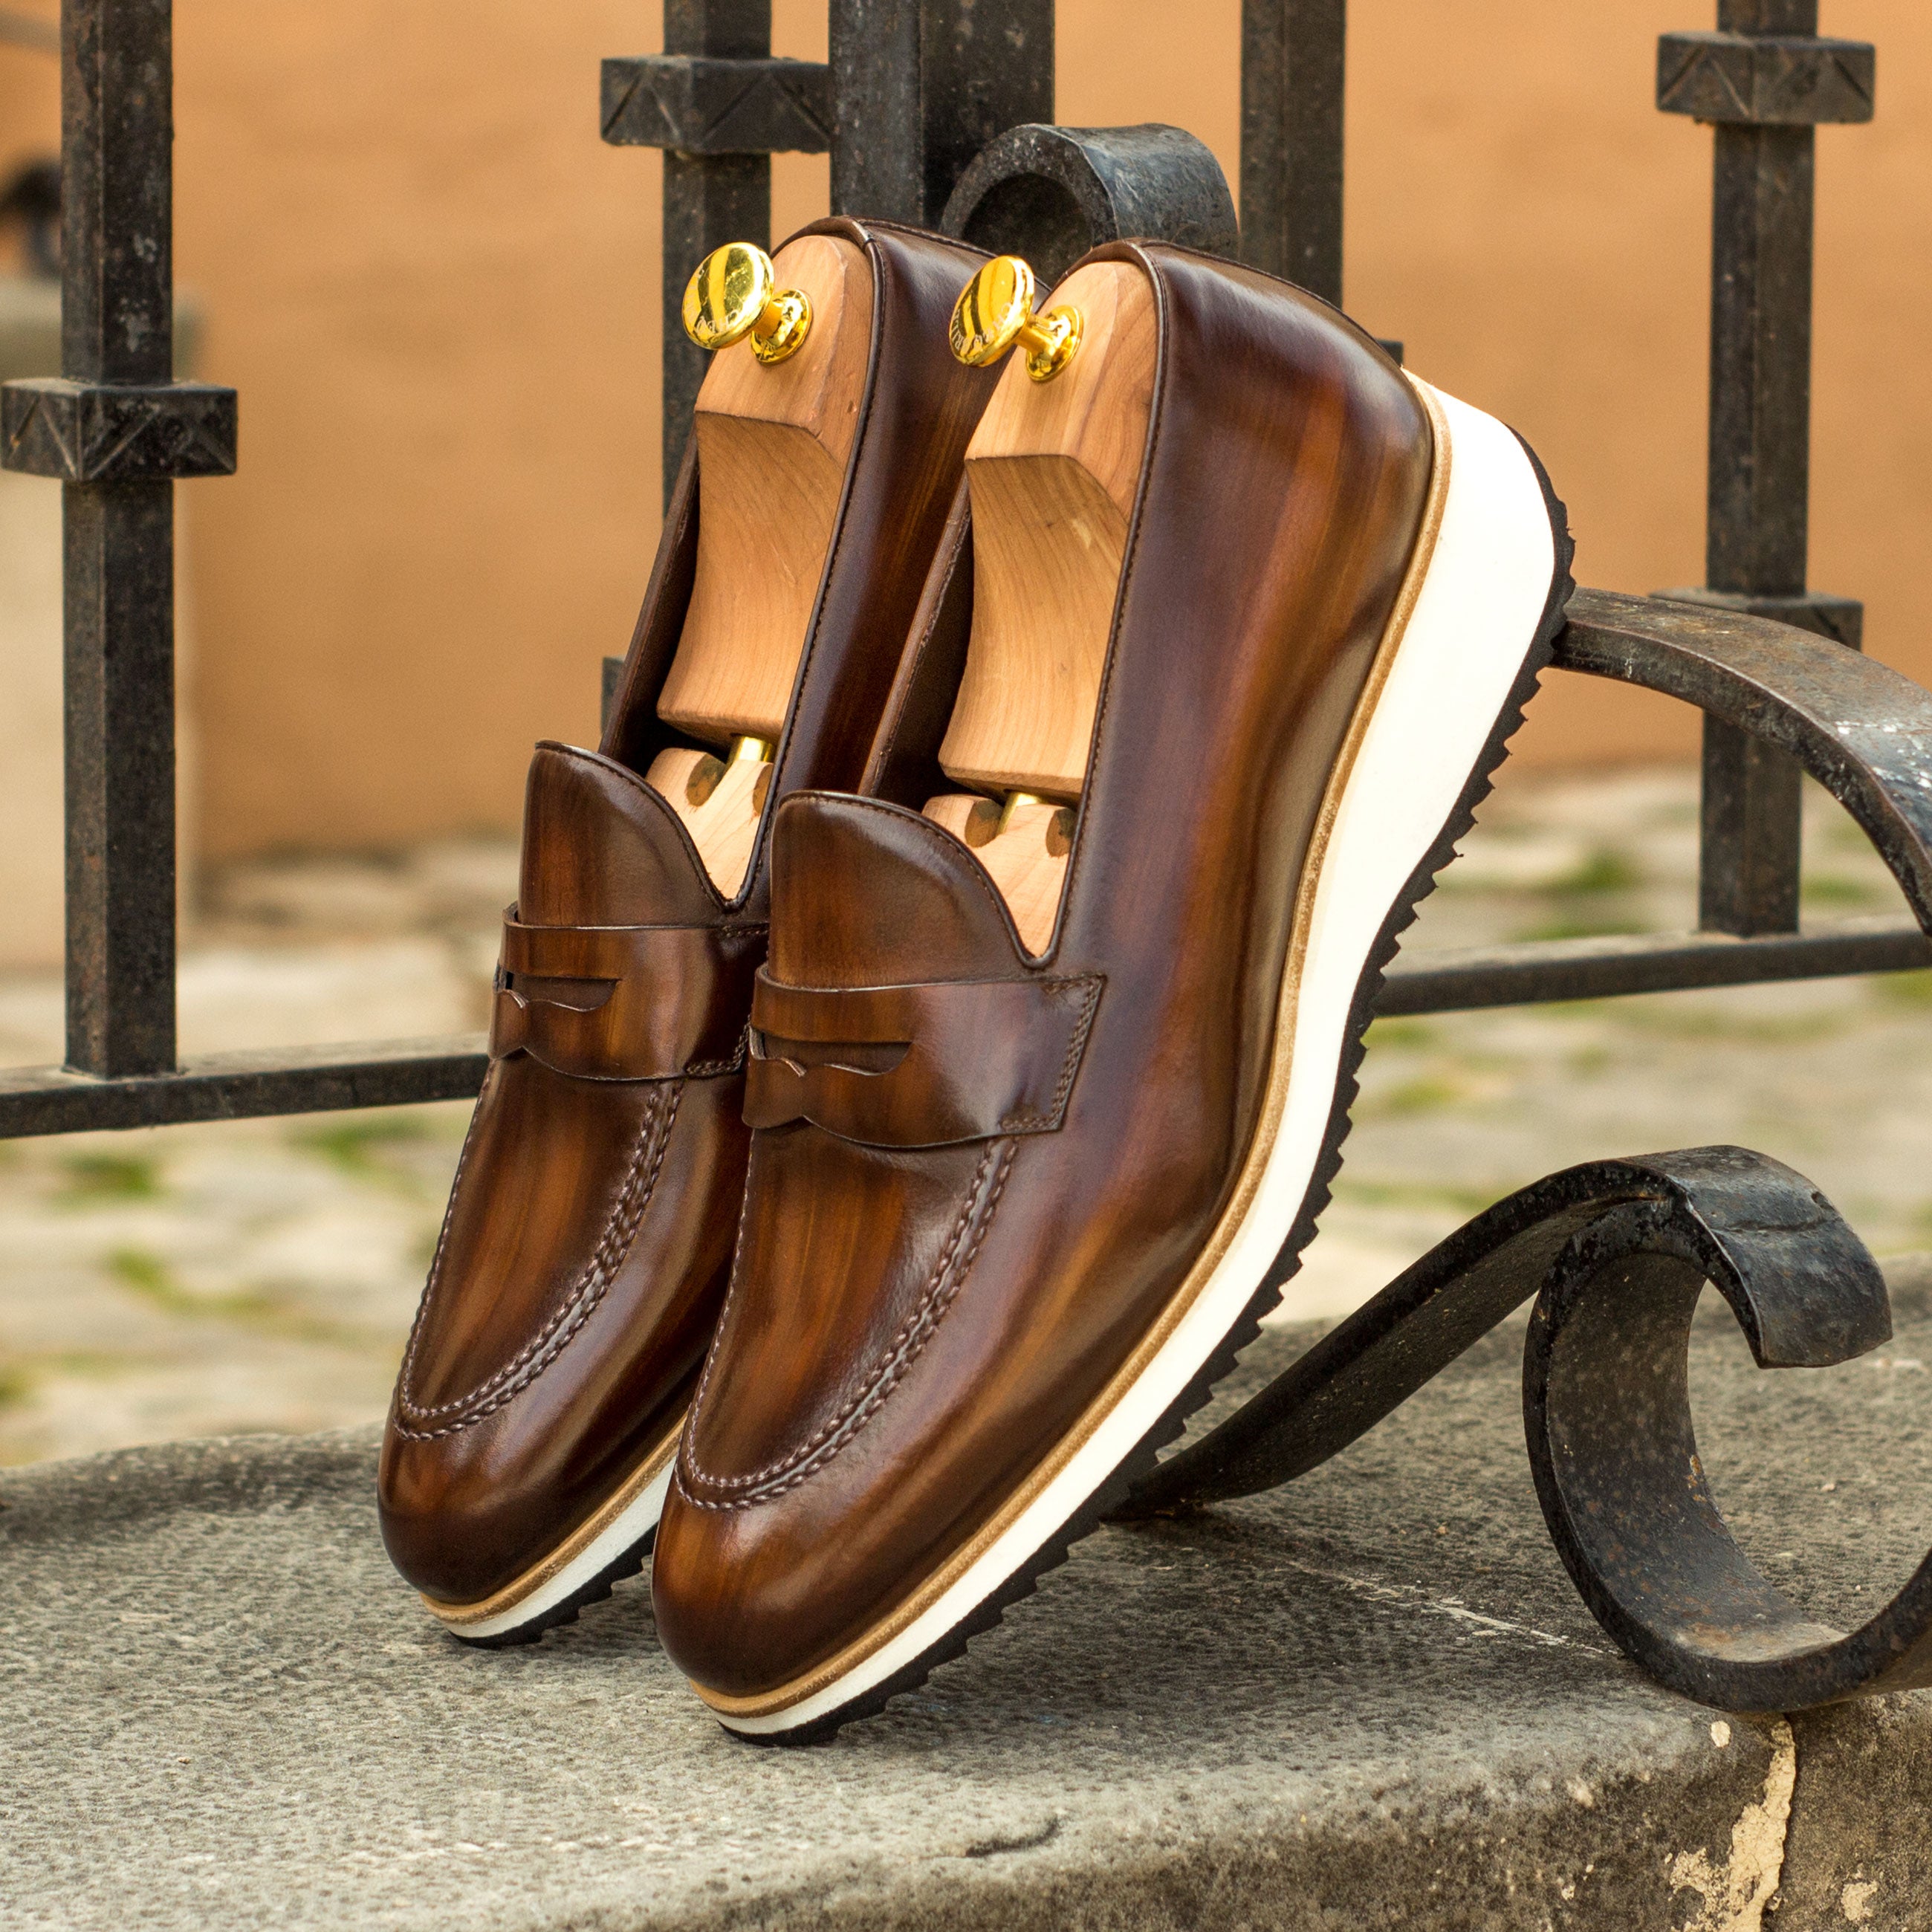 Brown Patina Loafer